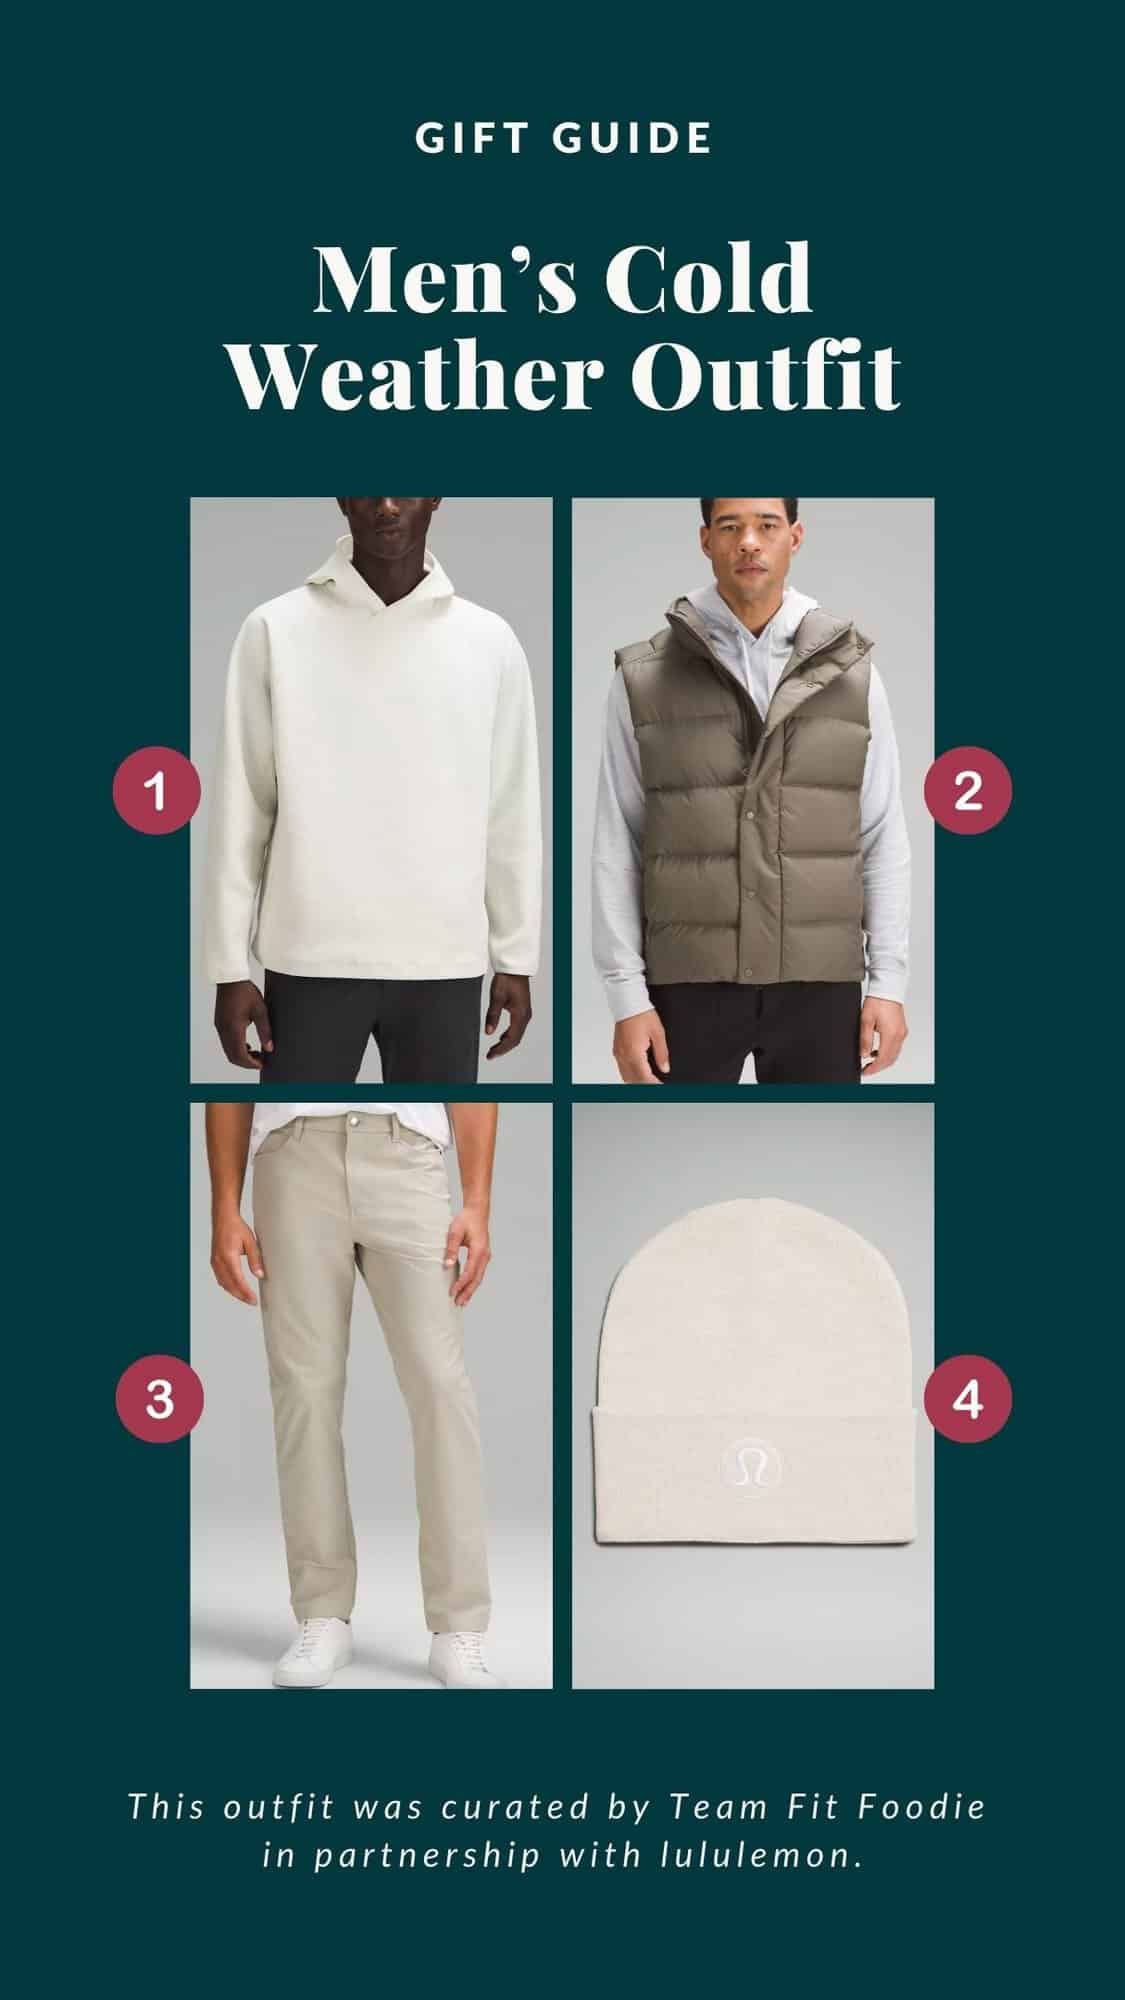 Men's cold weather outfit gift guide.